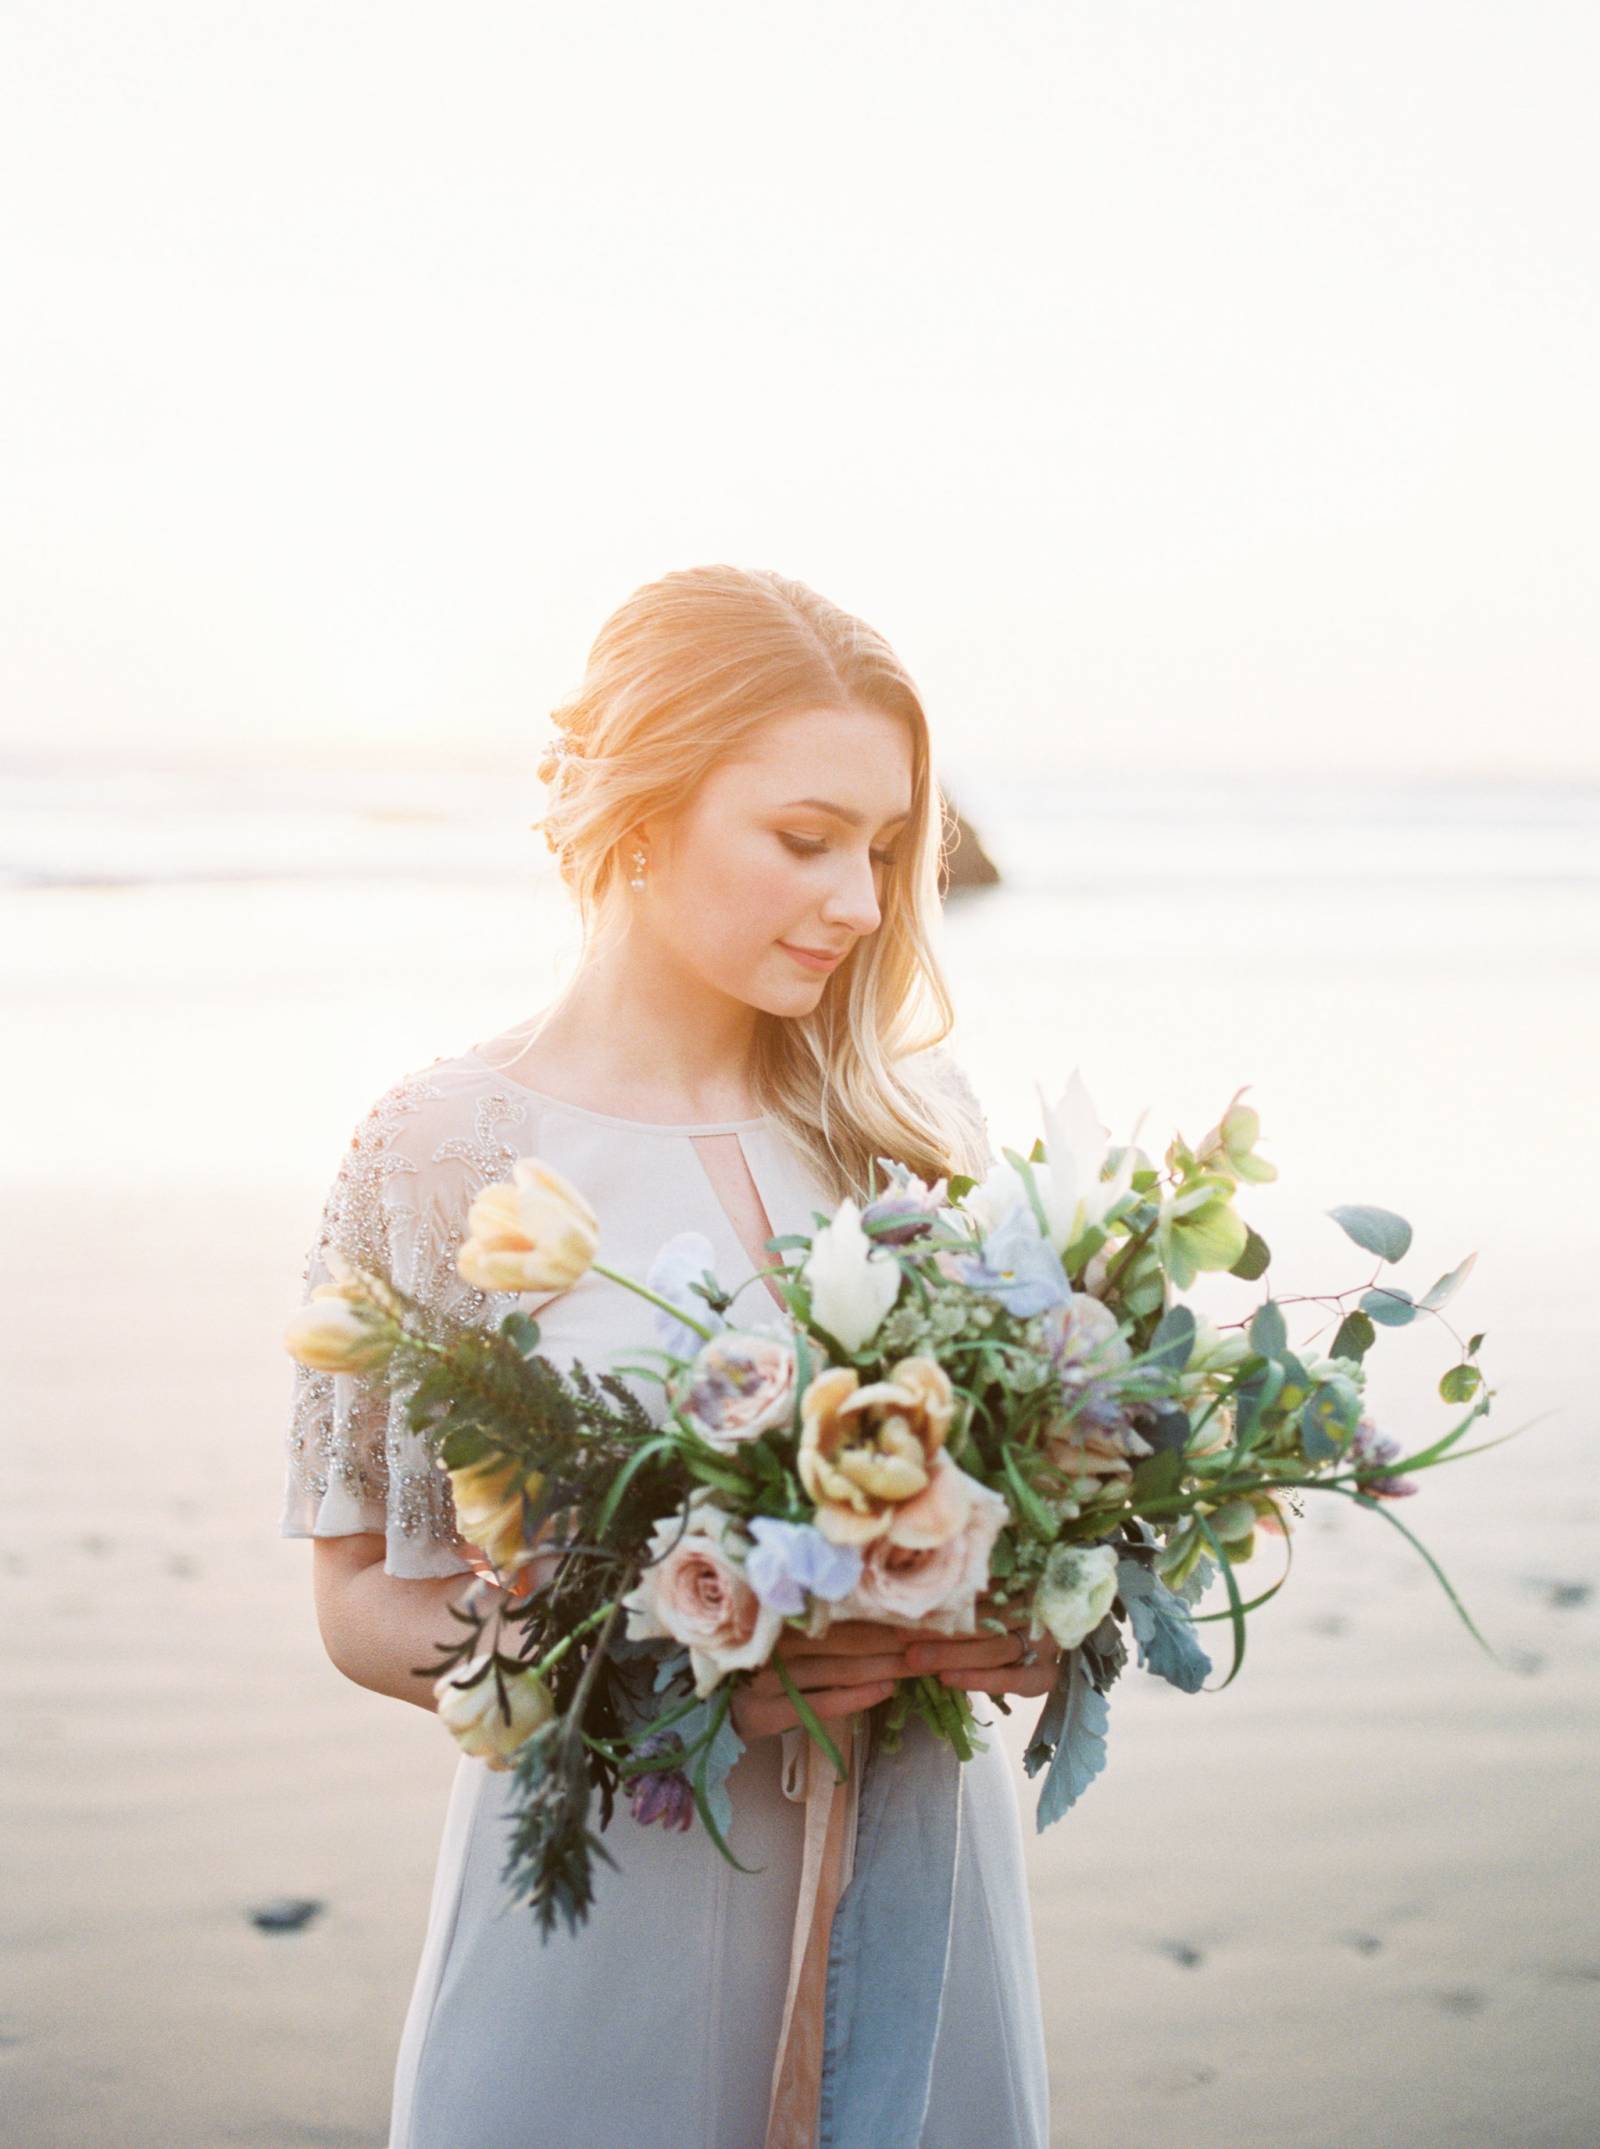 Engagement Session Inspired by Sunset Colors | Oregon Engagement